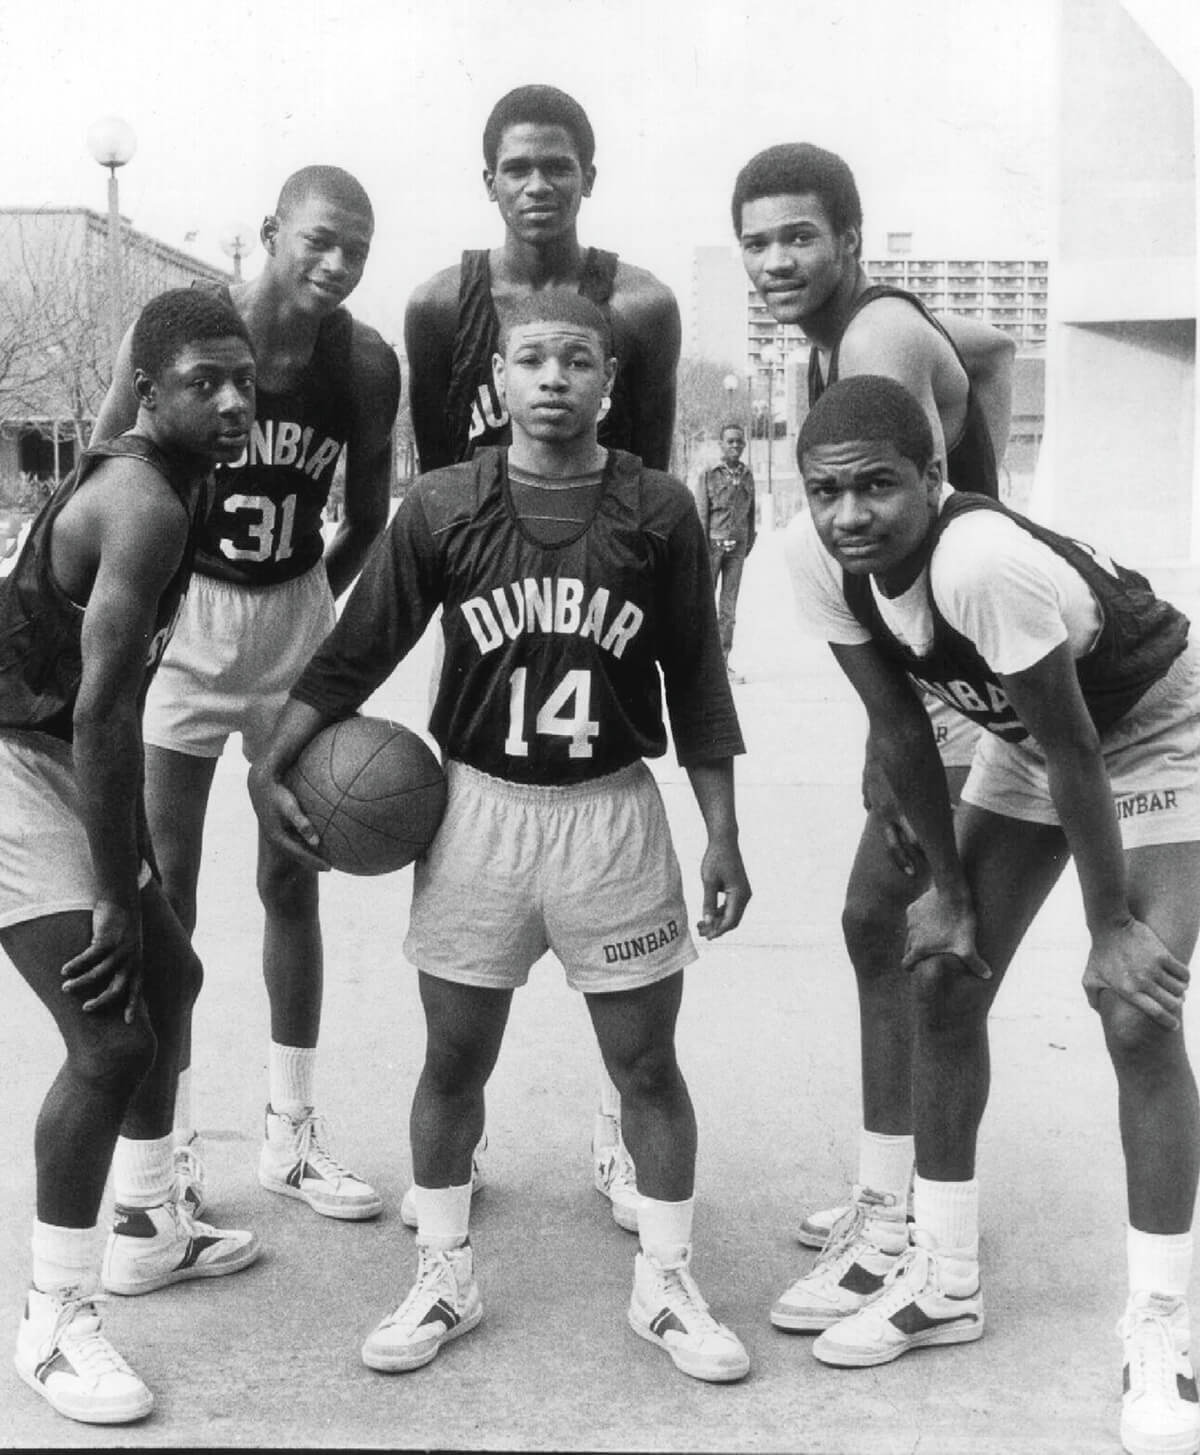 At 57, East Baltimores Muggsy Bogues is Still Larger Than Life